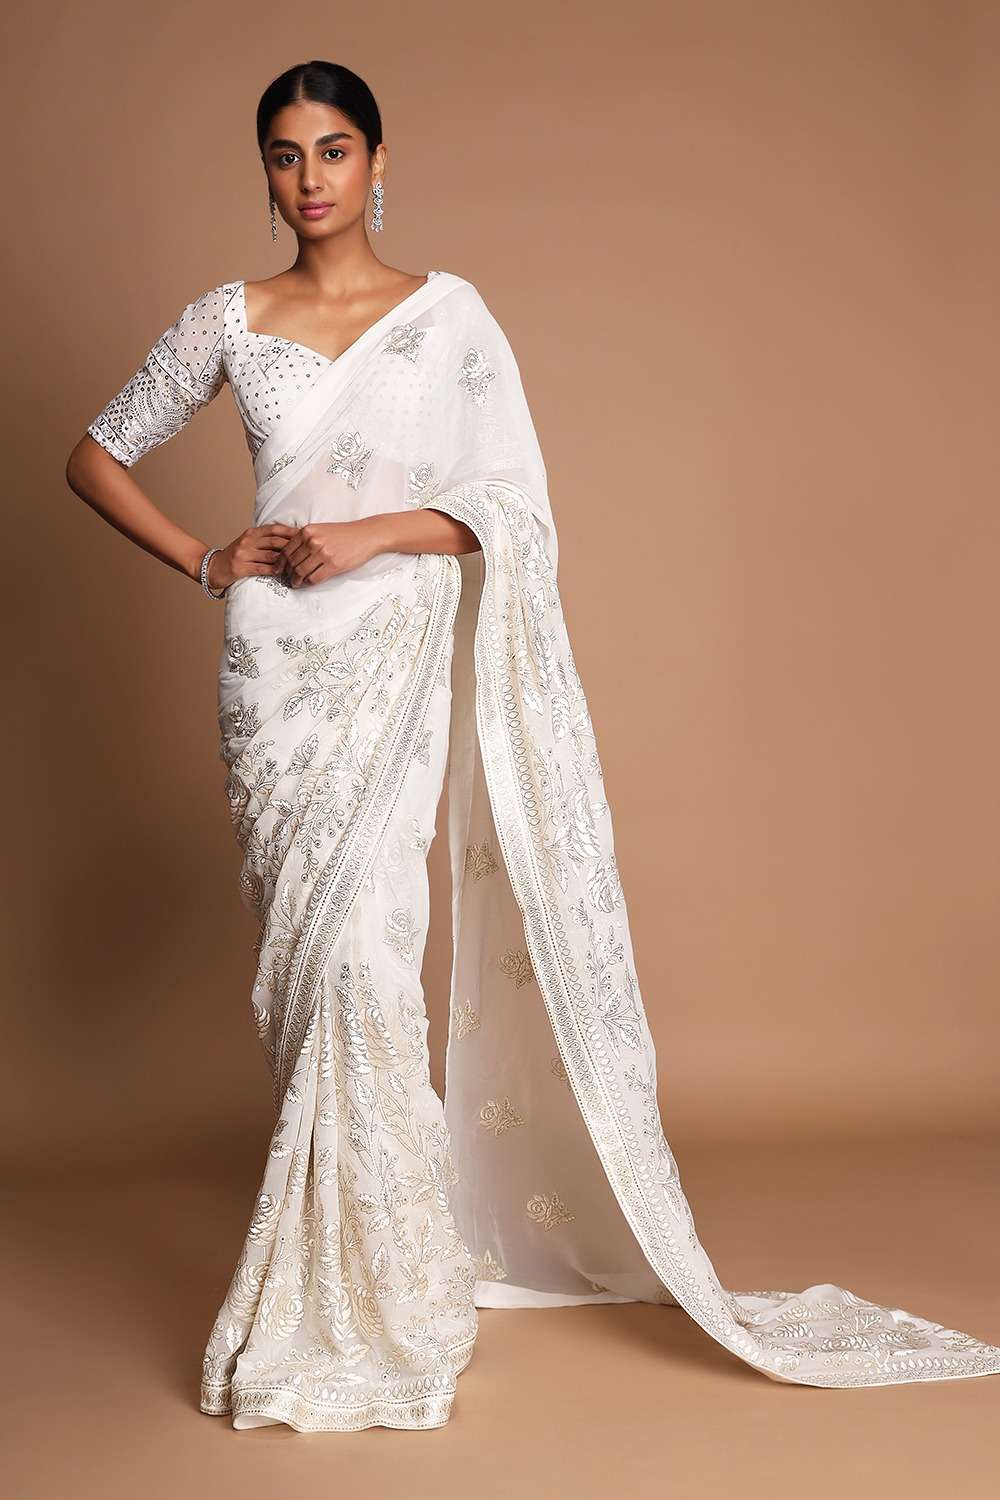 Georgette with Embroidery work White color Bollywood style s...